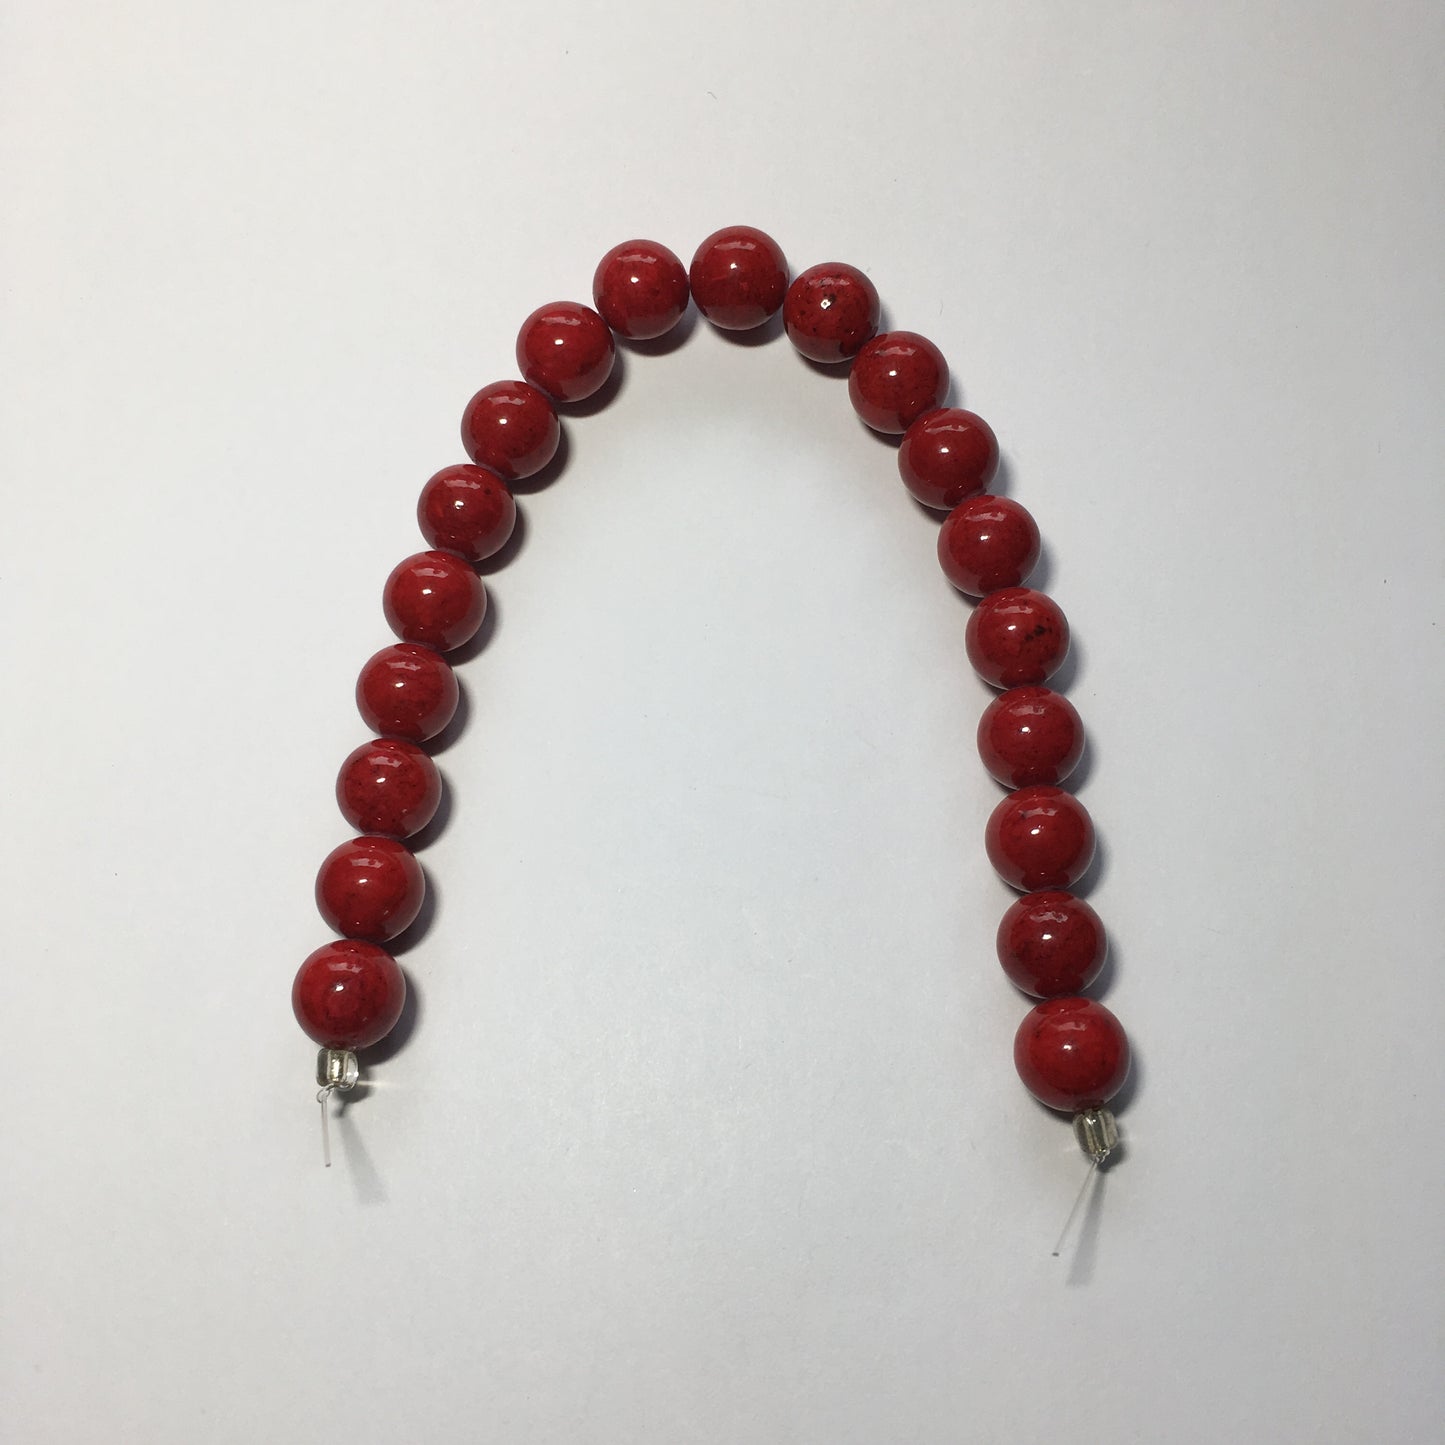 Blue Moon Natural Elegance Red Stone Round Beads, 10 mm - 19 Beads